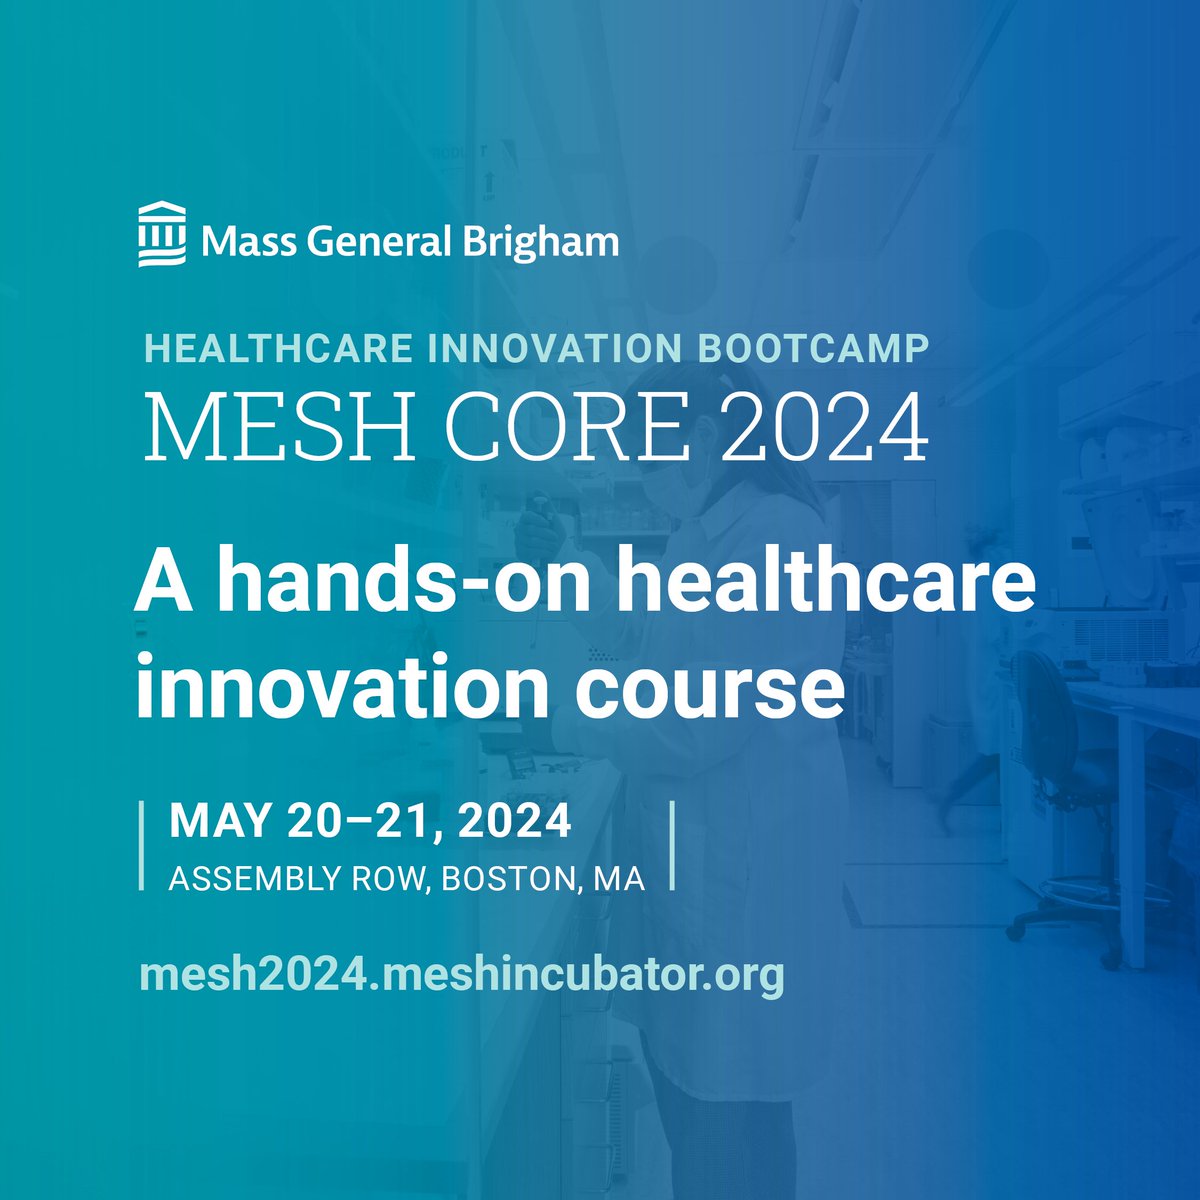 MESH Core 2024 kicks off on May 20! We're looking forward to two days of immersive learning & networking with healthcare trailblazers from Harvard, Mass General Brigham and industry. Let's innovate together! mesh2024.meshincubator.org #MESHCore2024 #Innovation #HealthcareInnovation